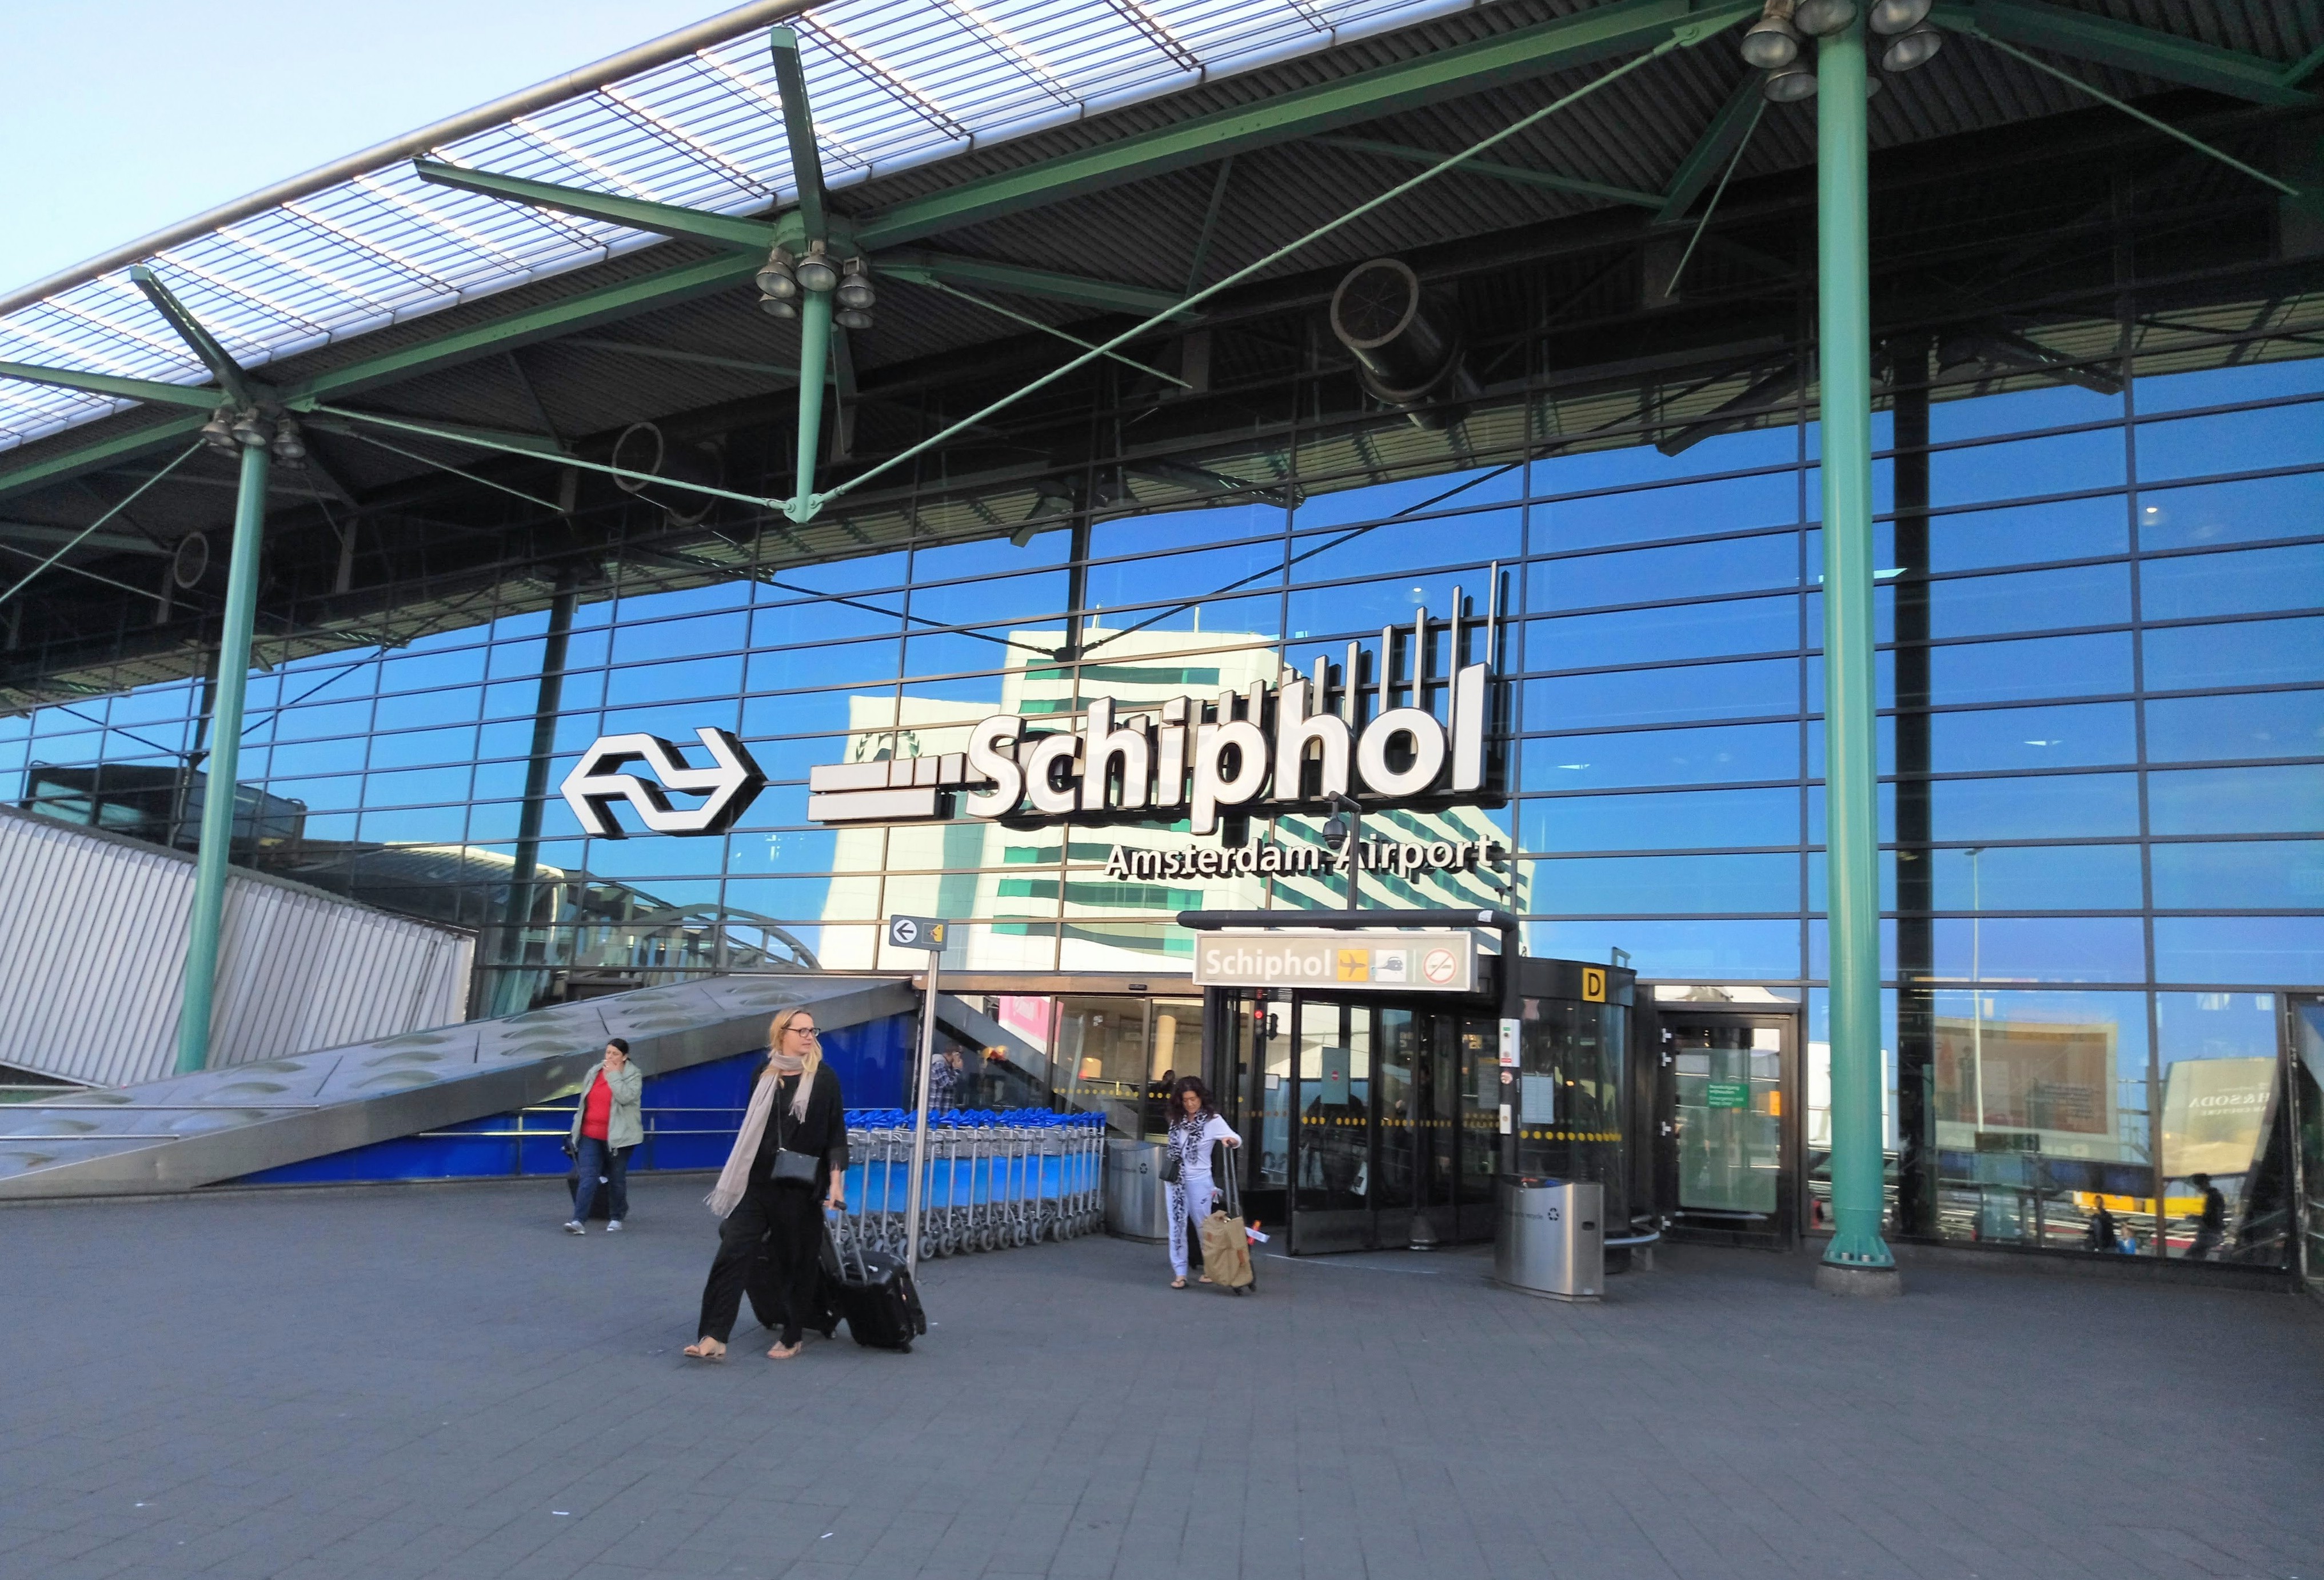 Train from Schiphol to Amsterdam - Amsterdam - 